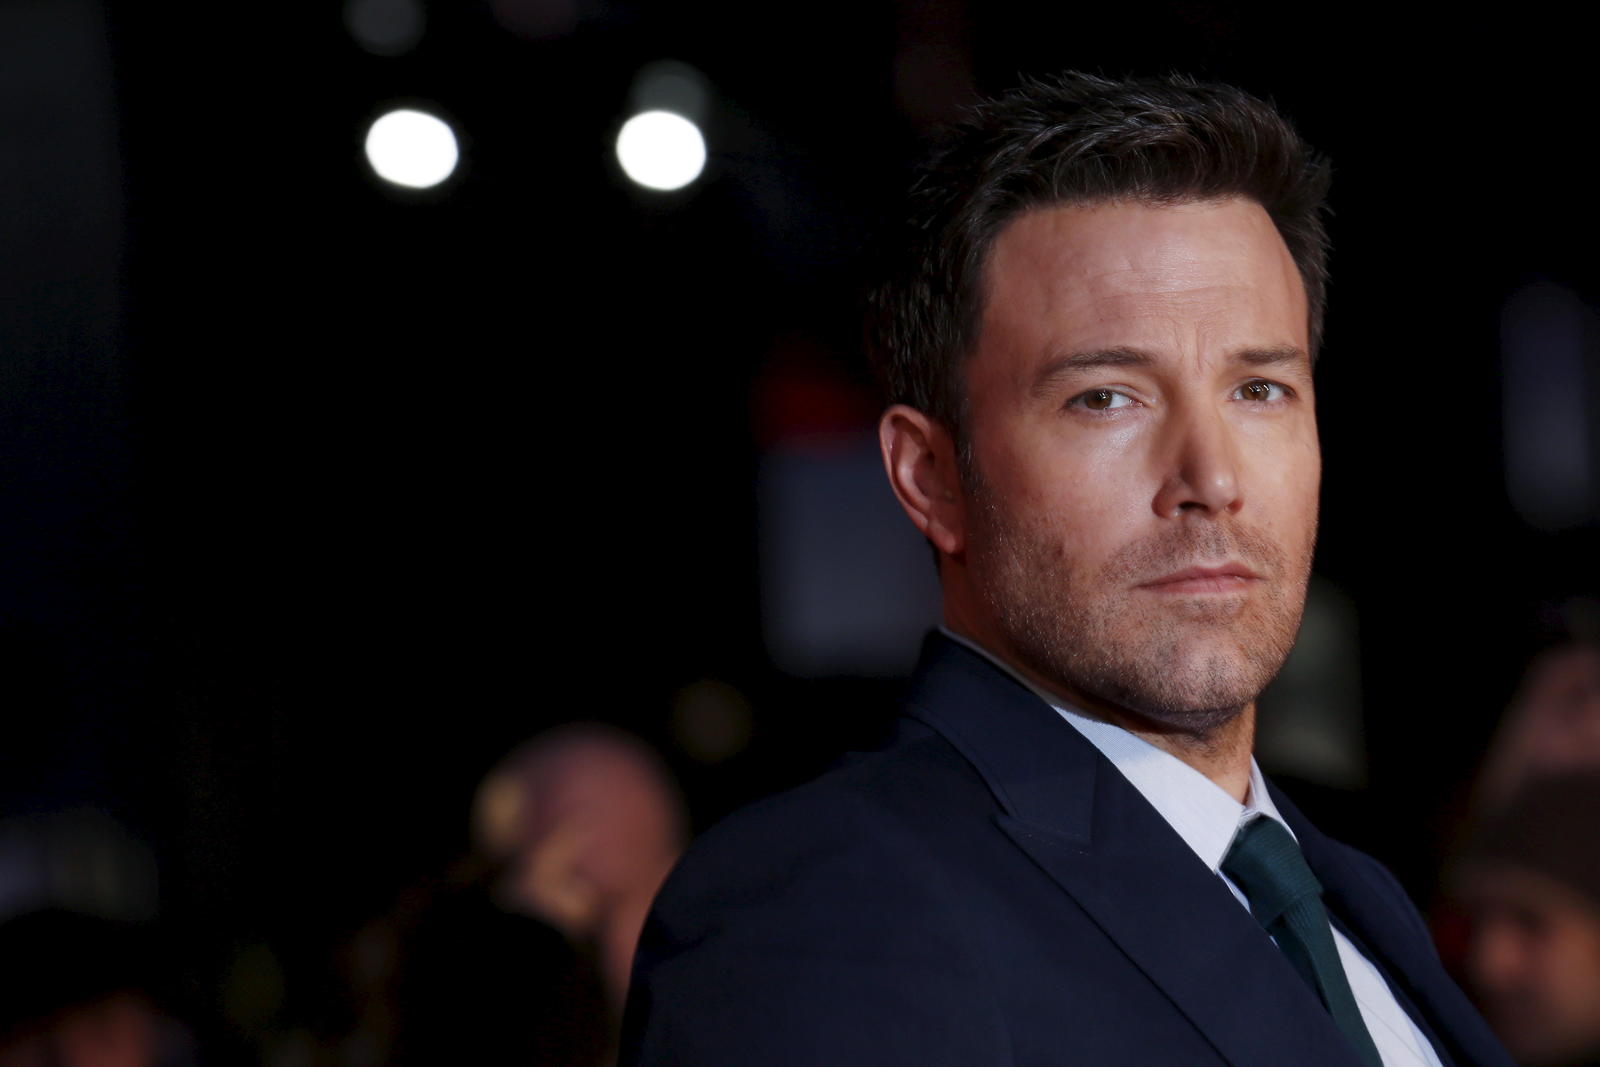 Ben Affleck arrives for the European Premiere of “Batman V Superman: Dawn of Justice” in Leicester Square in London